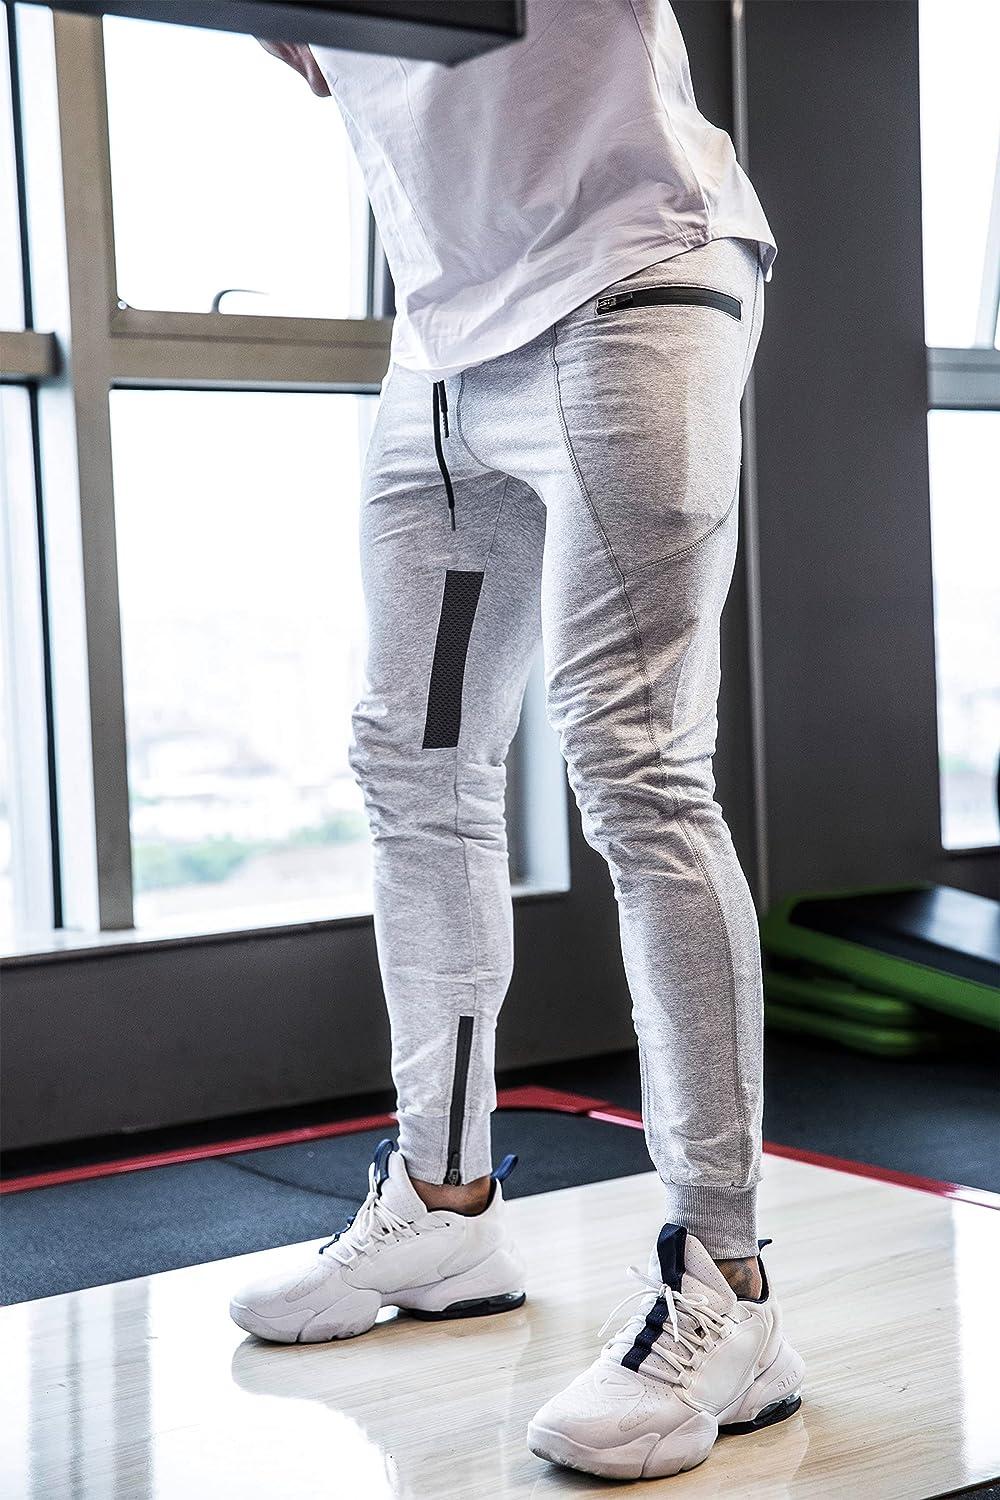 FIRSTGYM Mens Joggers Sweatpants Slim Fit Workout Training Thigh Mesh Gym  Jogger Pants with Zipper Pockets Light Grey Large